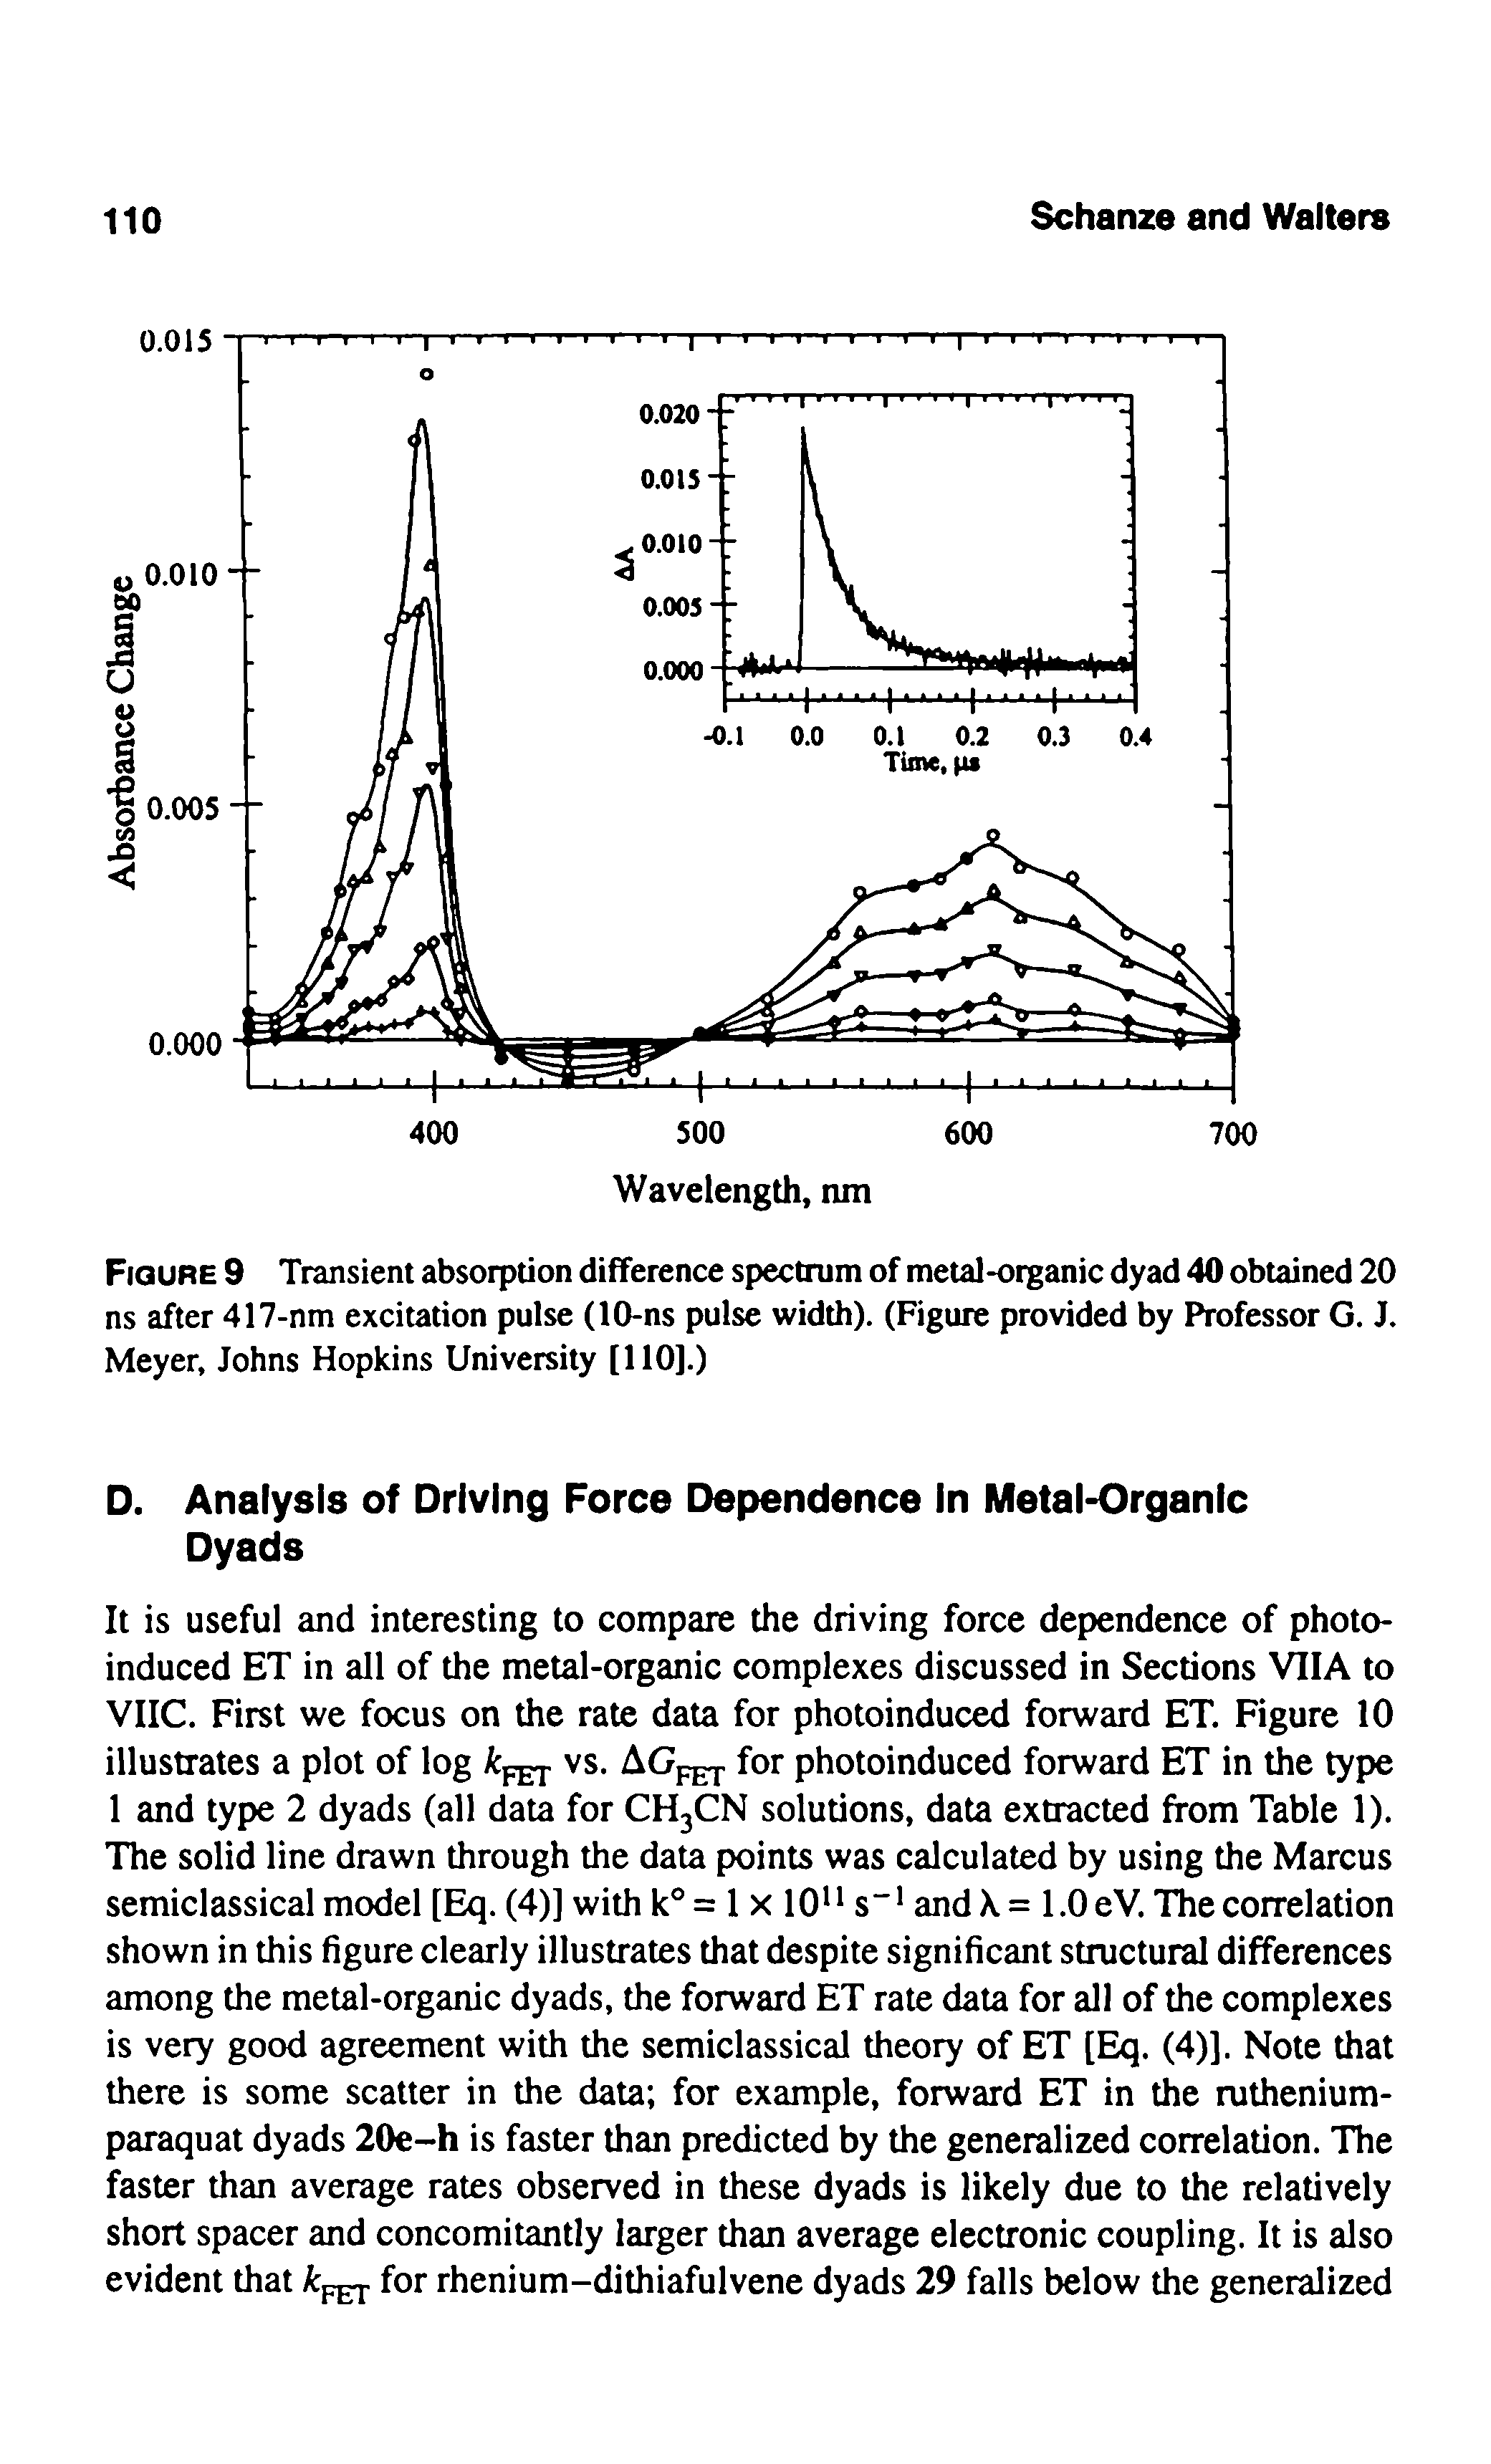 Figure 9 Transient absorption difference spectrum of metal-organic dyad 40 obtained 20 ns after 417-nm excitation pulse (10-ns pulse width). (Figure provided by Professor G. J. Meyer, Johns Hopkins University [110].)...